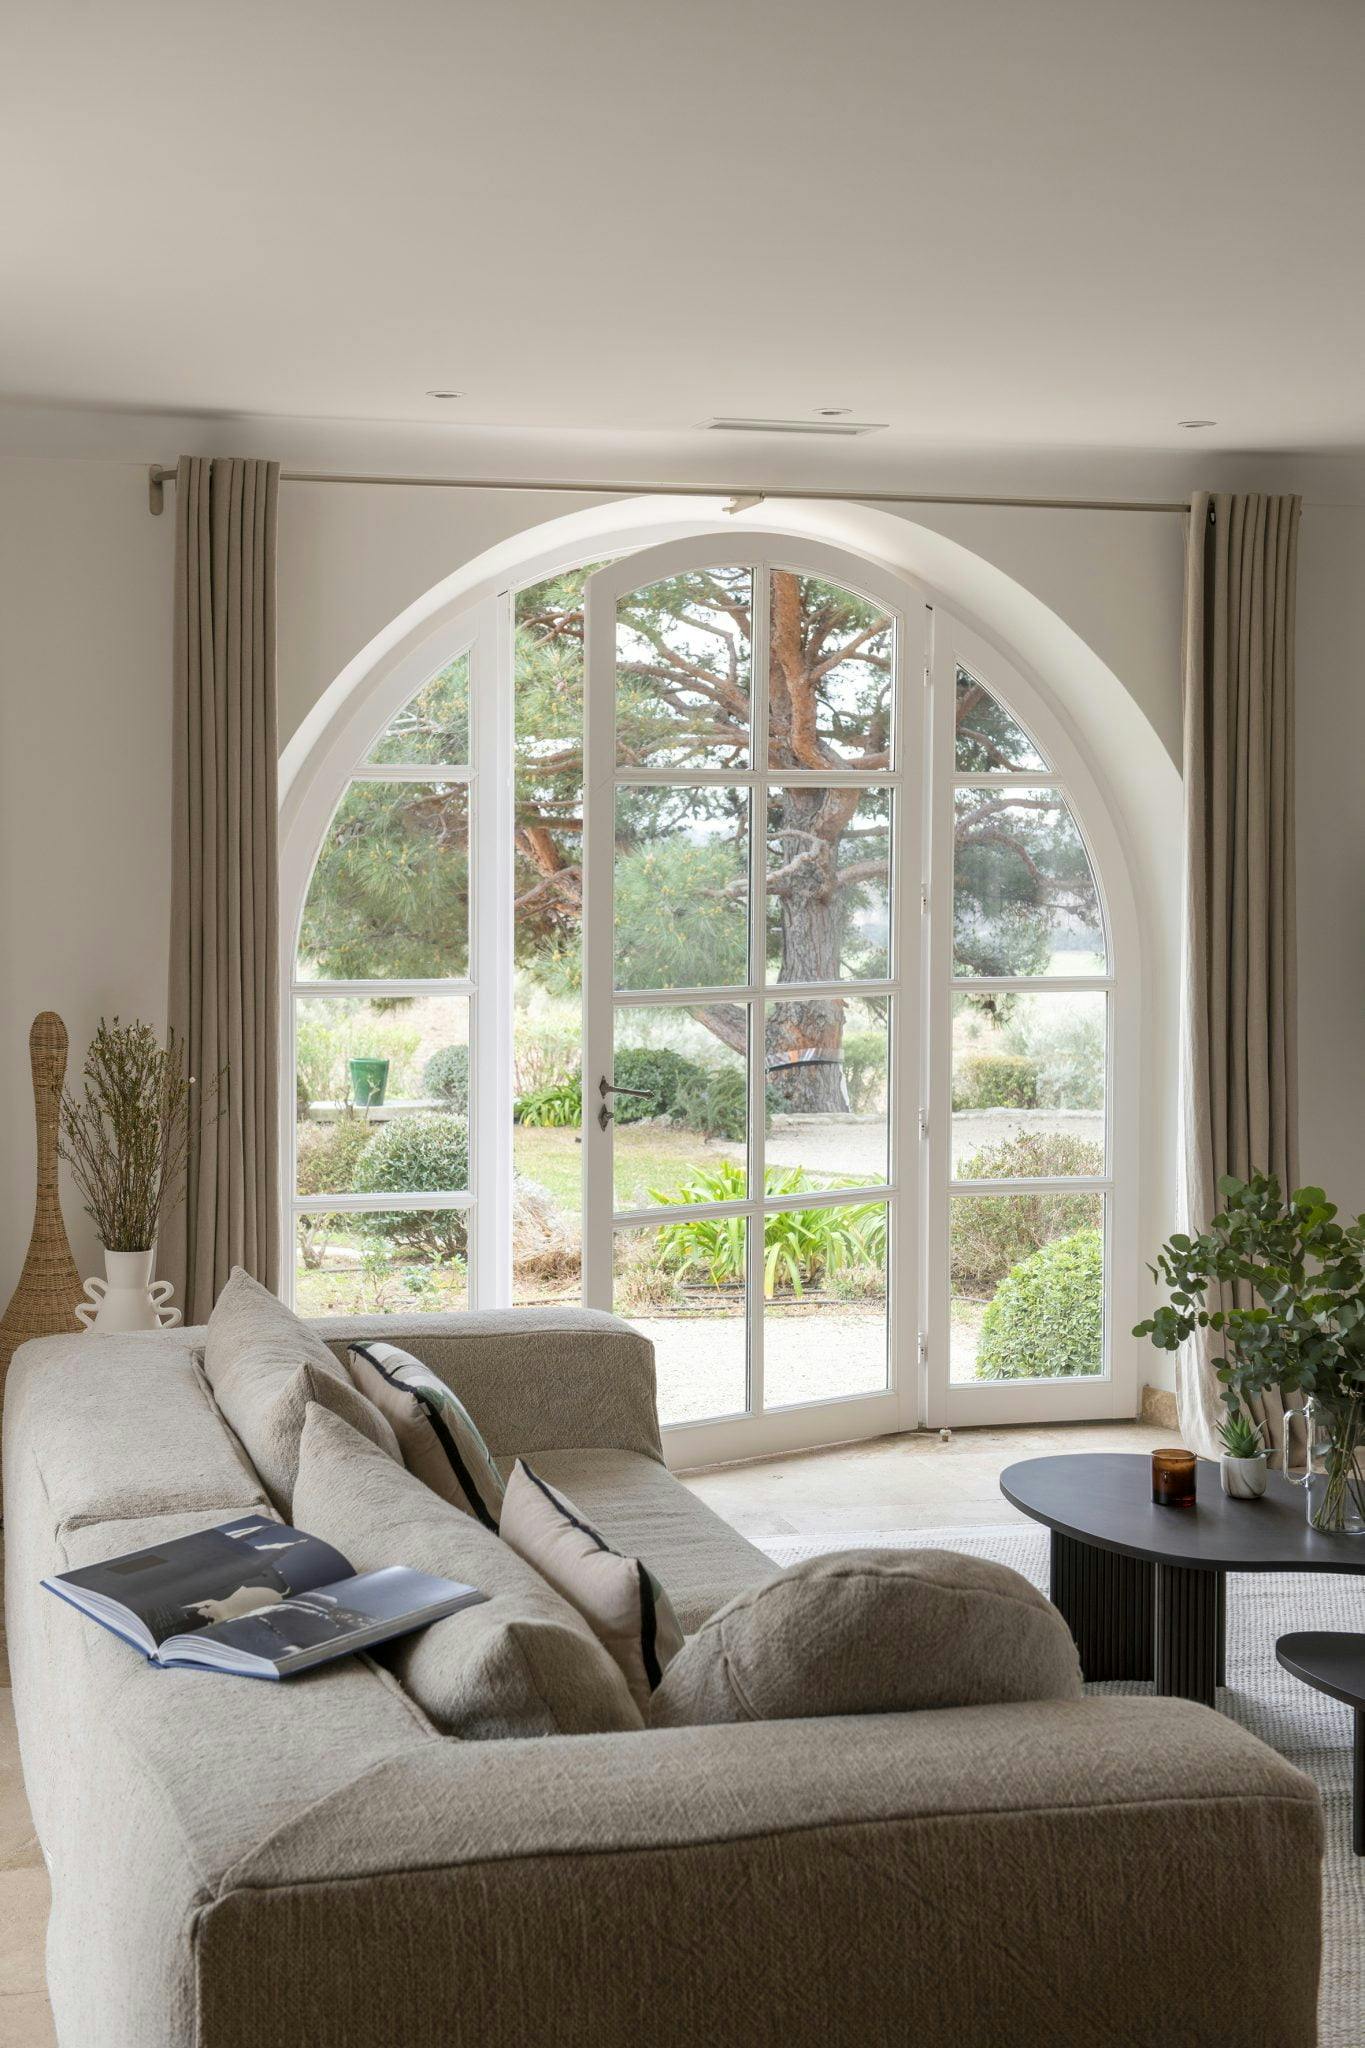 Living room with sofa and arched window